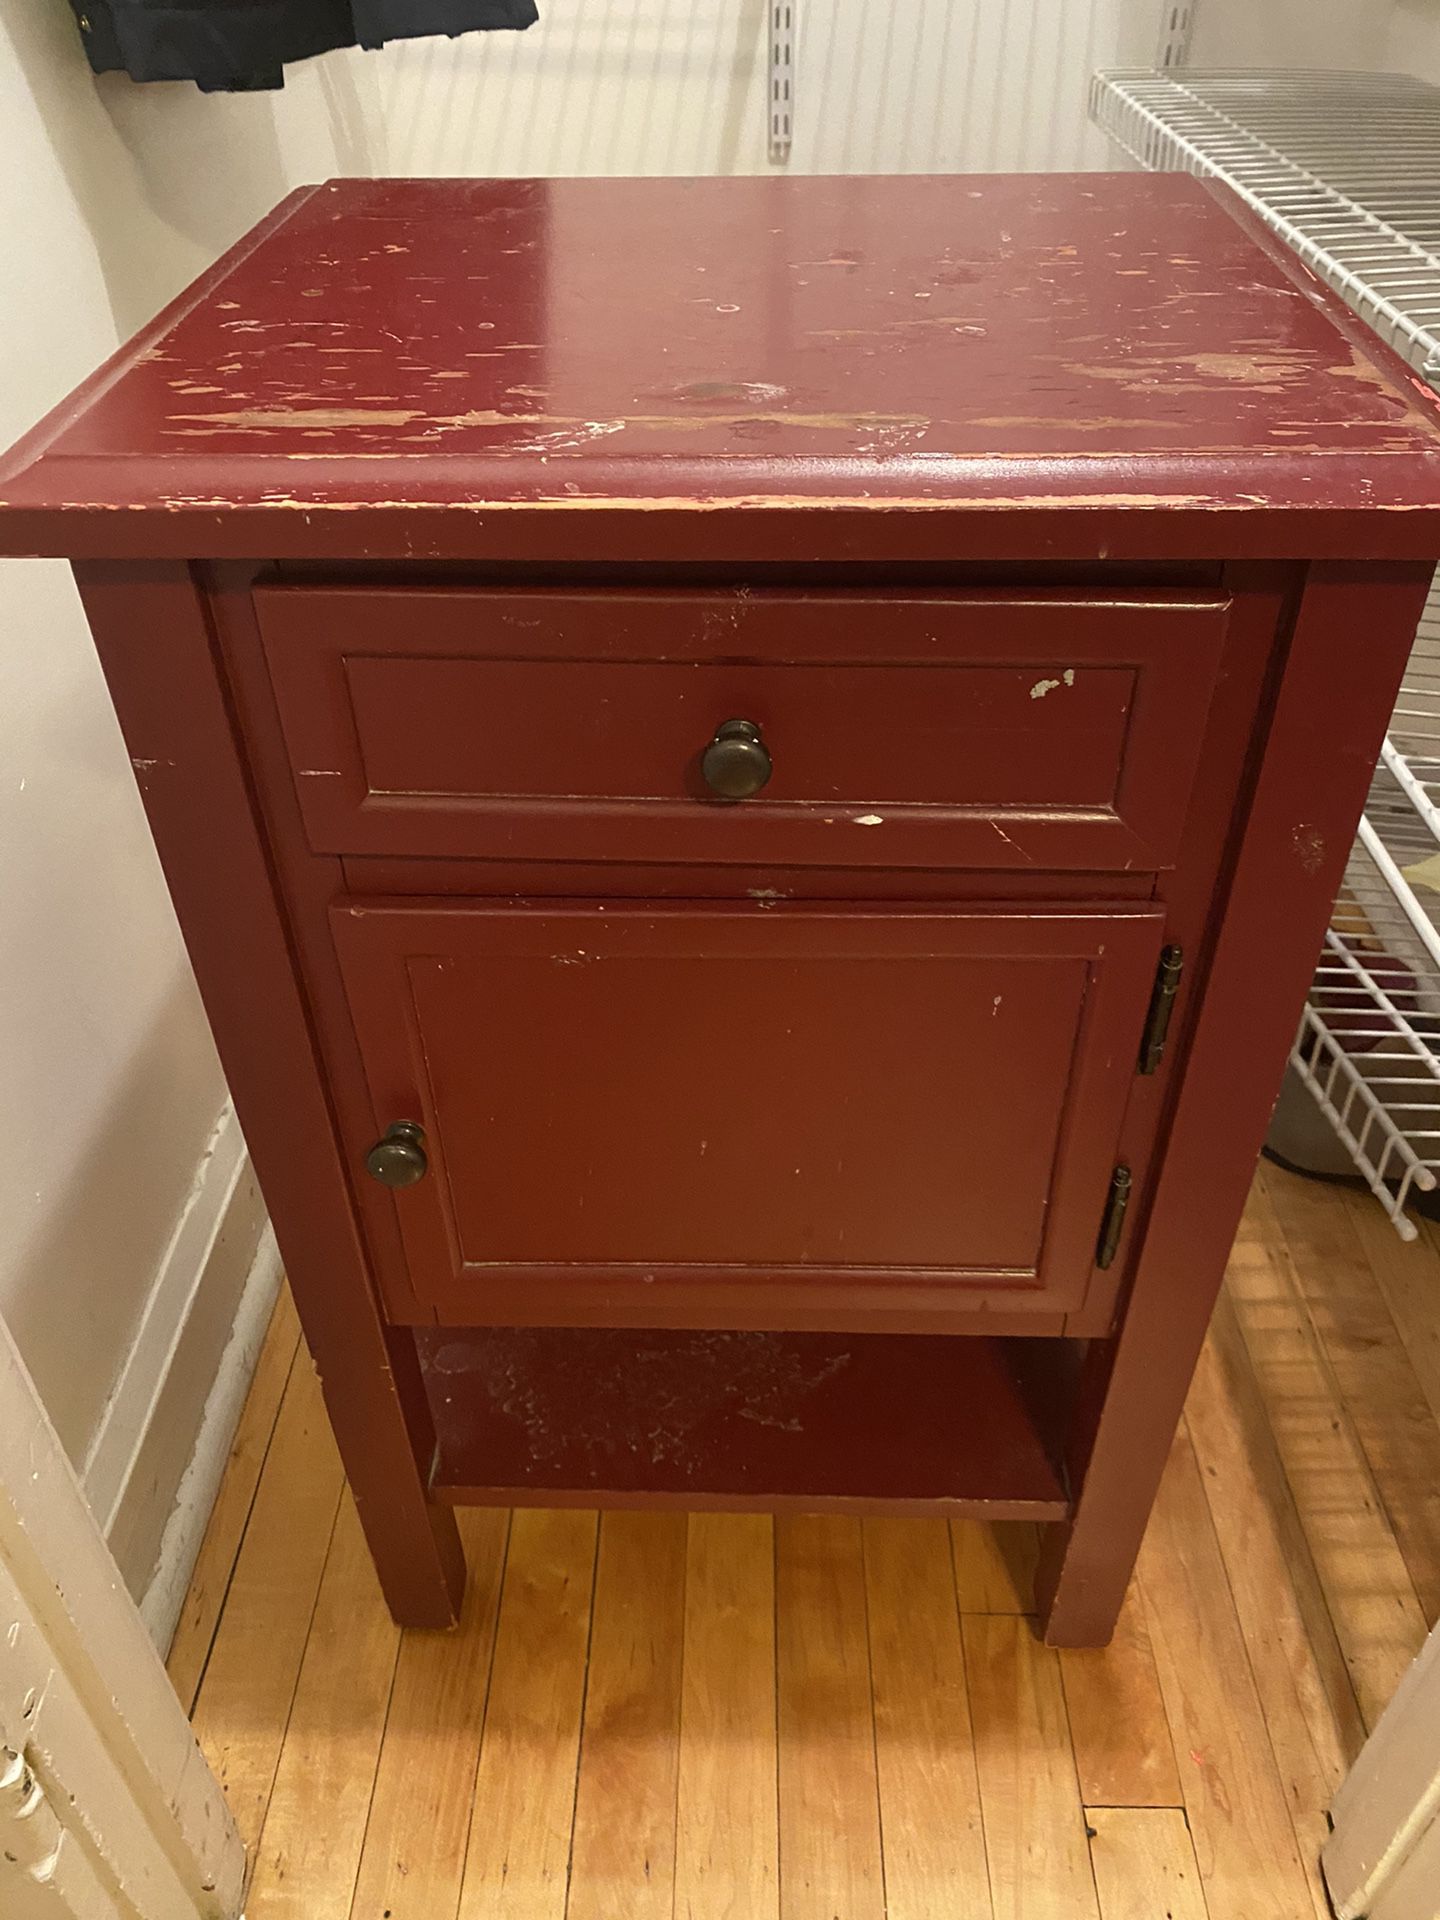 Wood nightstand table for $8